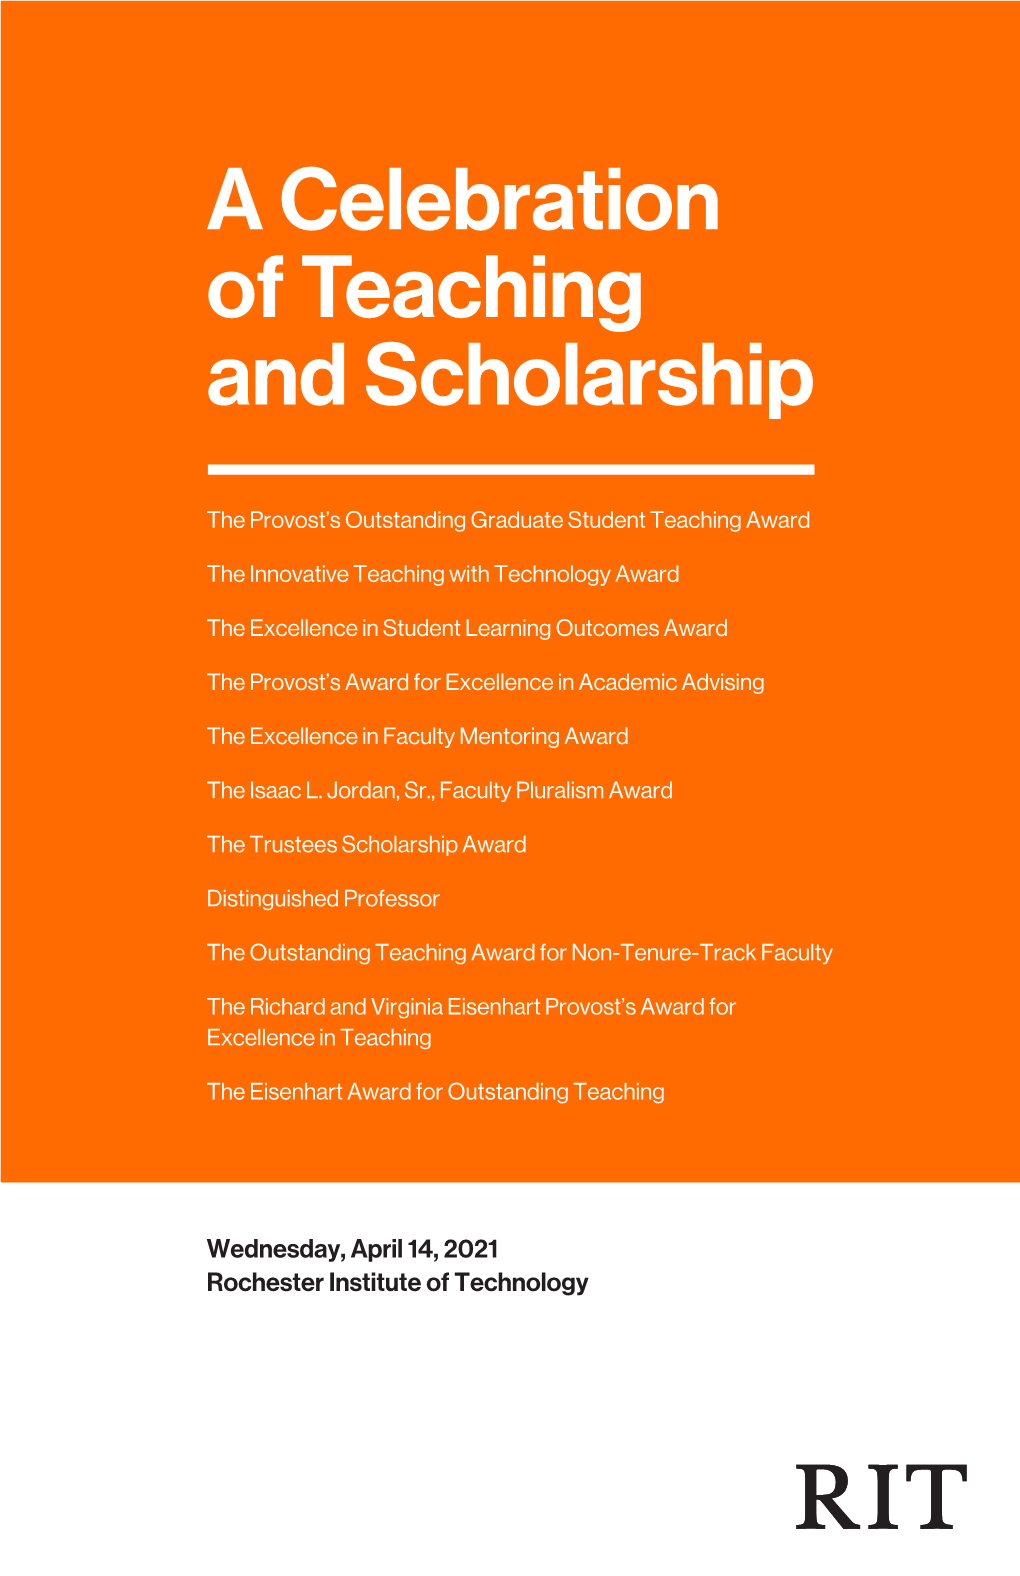 A Celebration of Teaching and Scholarship